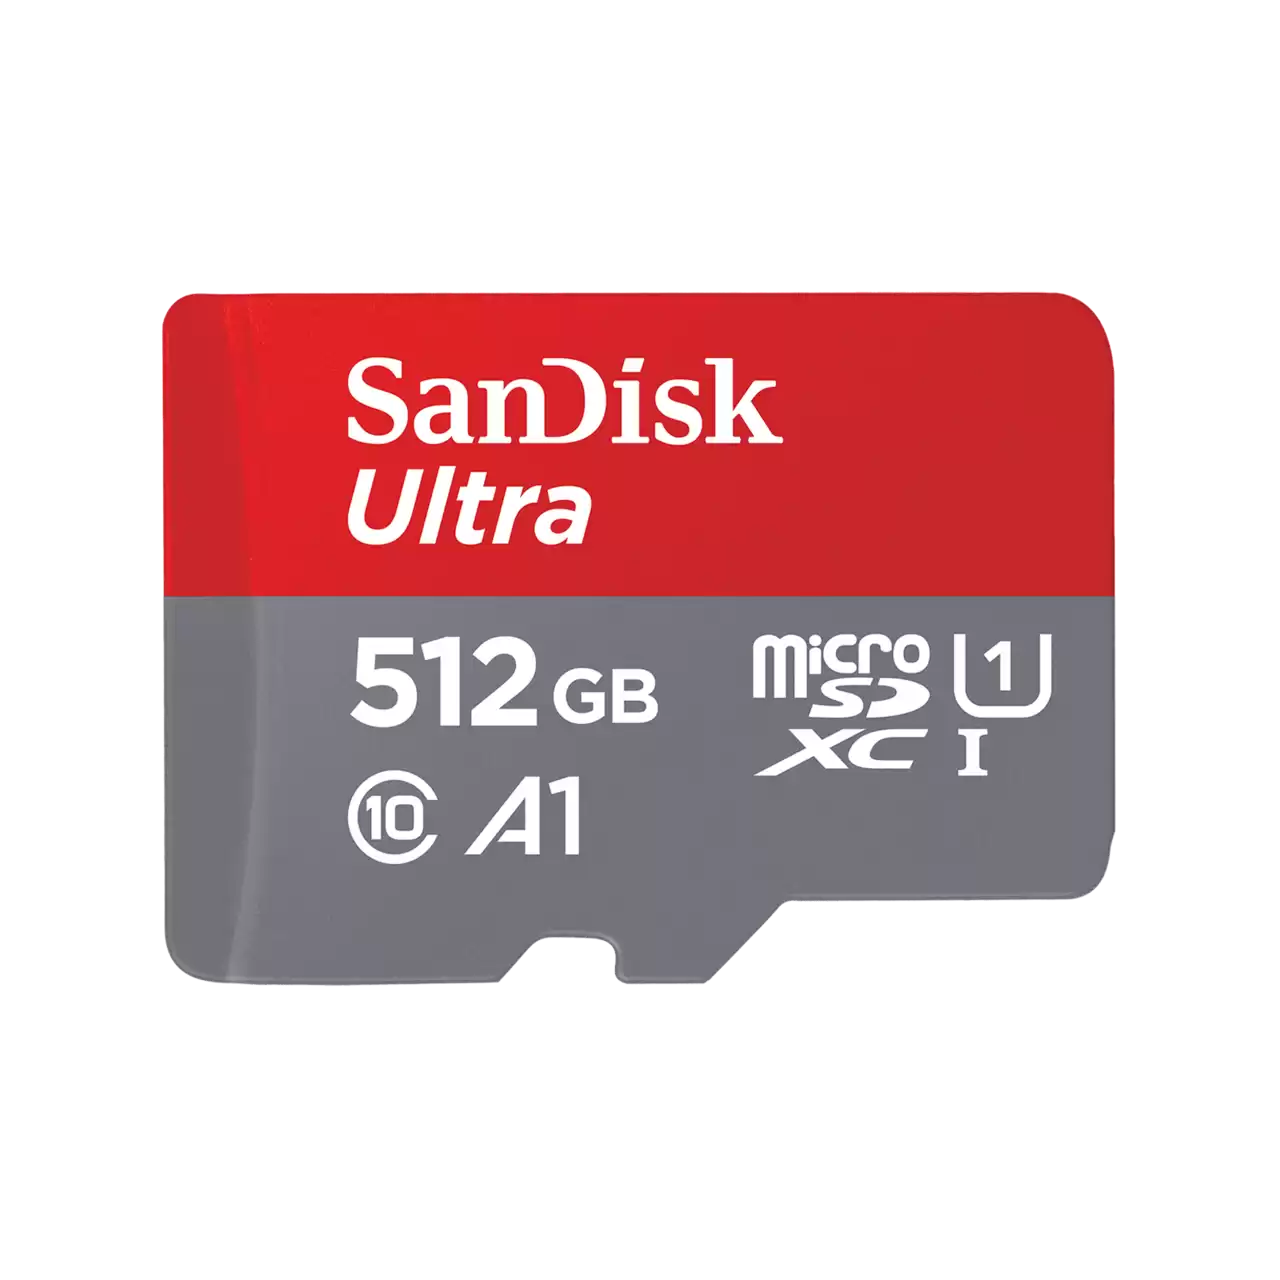 SanDisk 1TB Ultra microSDXC UHS-I Memory Card with SD Adapter (UP to 120  MBP/s) - SDSQUAC-1T00-GN6MA